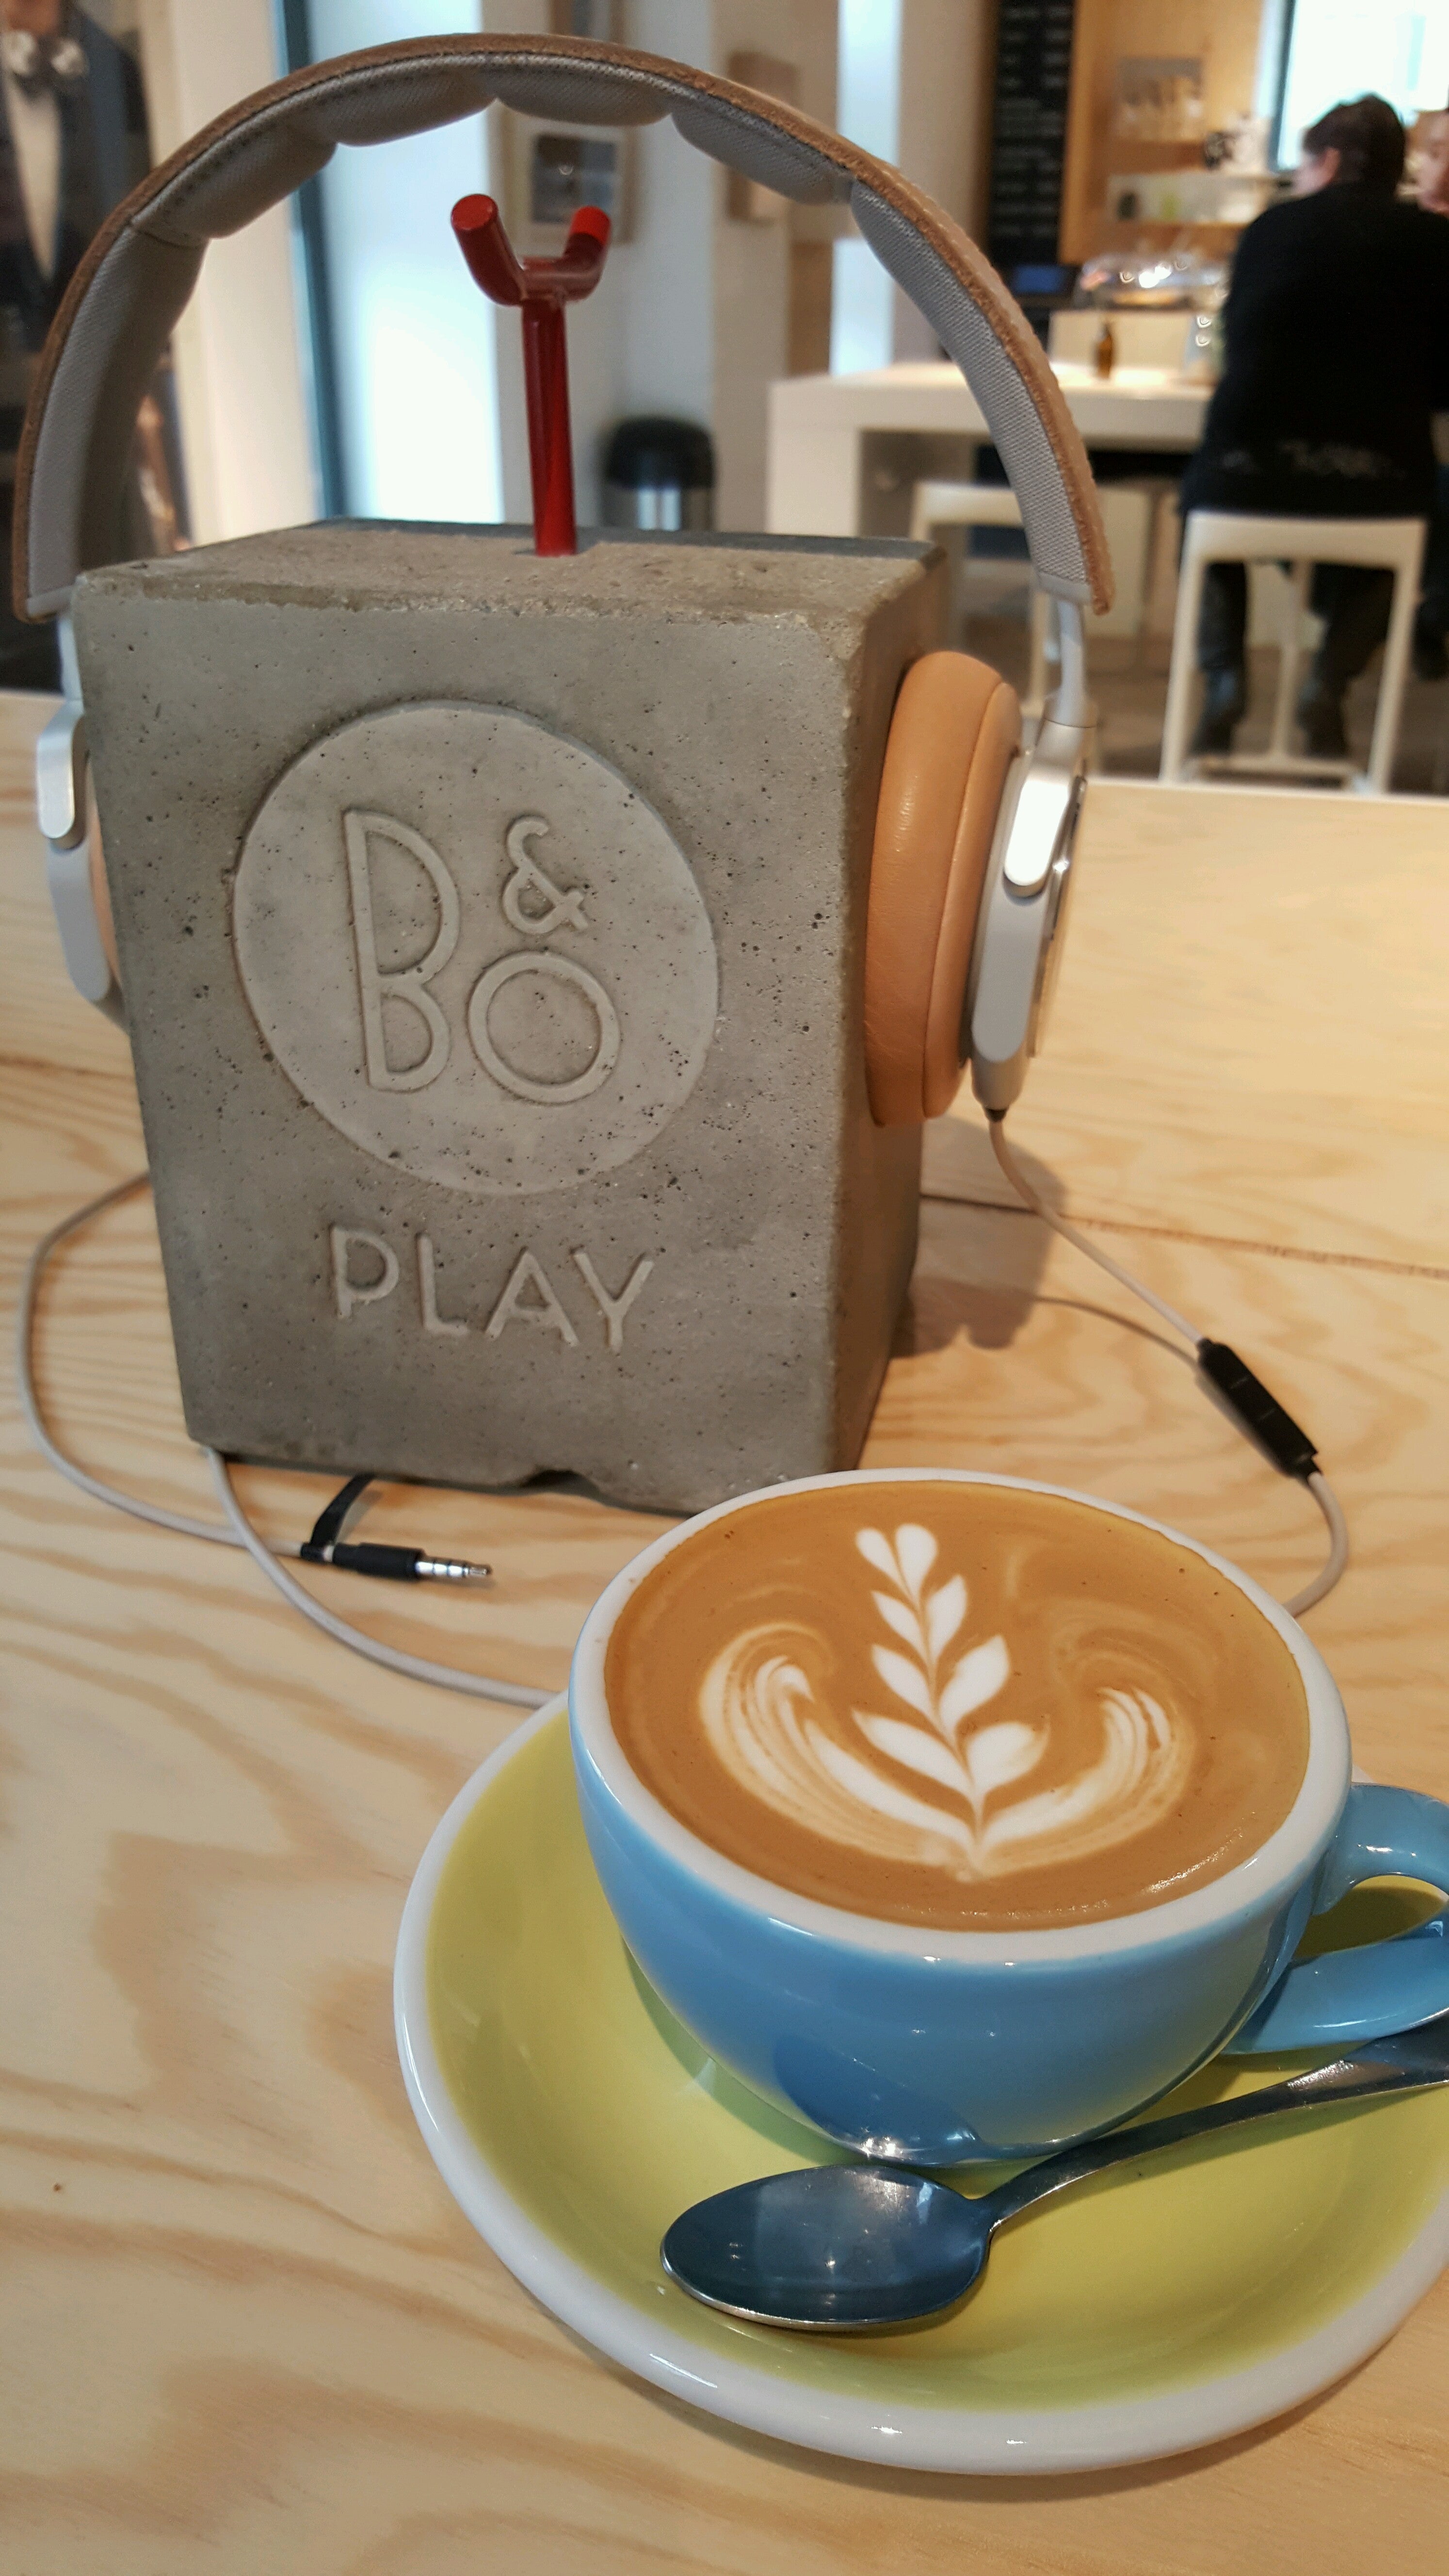 BeoPlay BudaPest